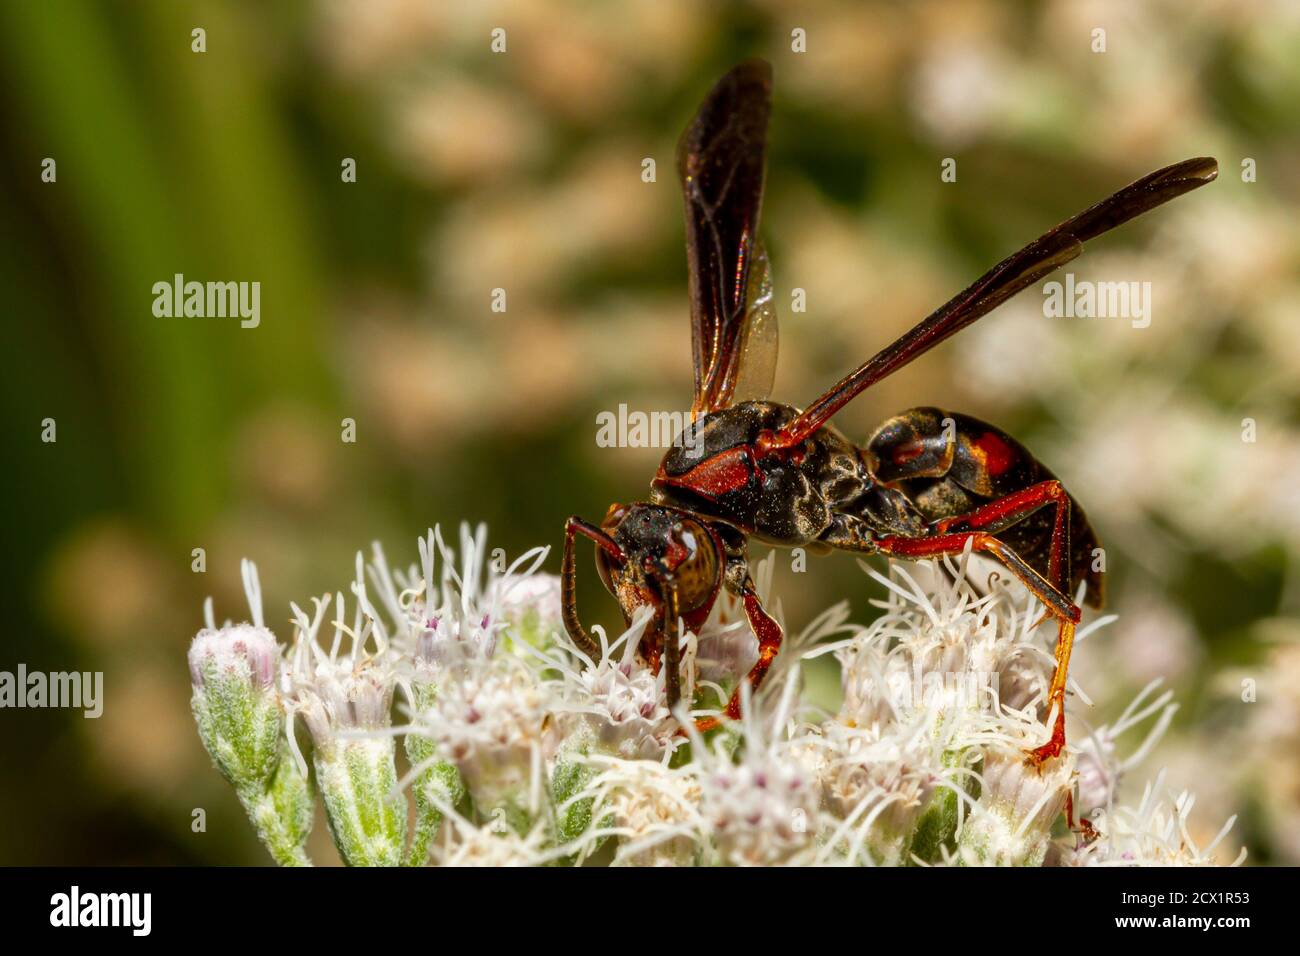 A black and red wasp with green brown eyes called metricus paper wasp (polistes metricus) is walking on common boneset white flowers sucking nectar an Stock Photo